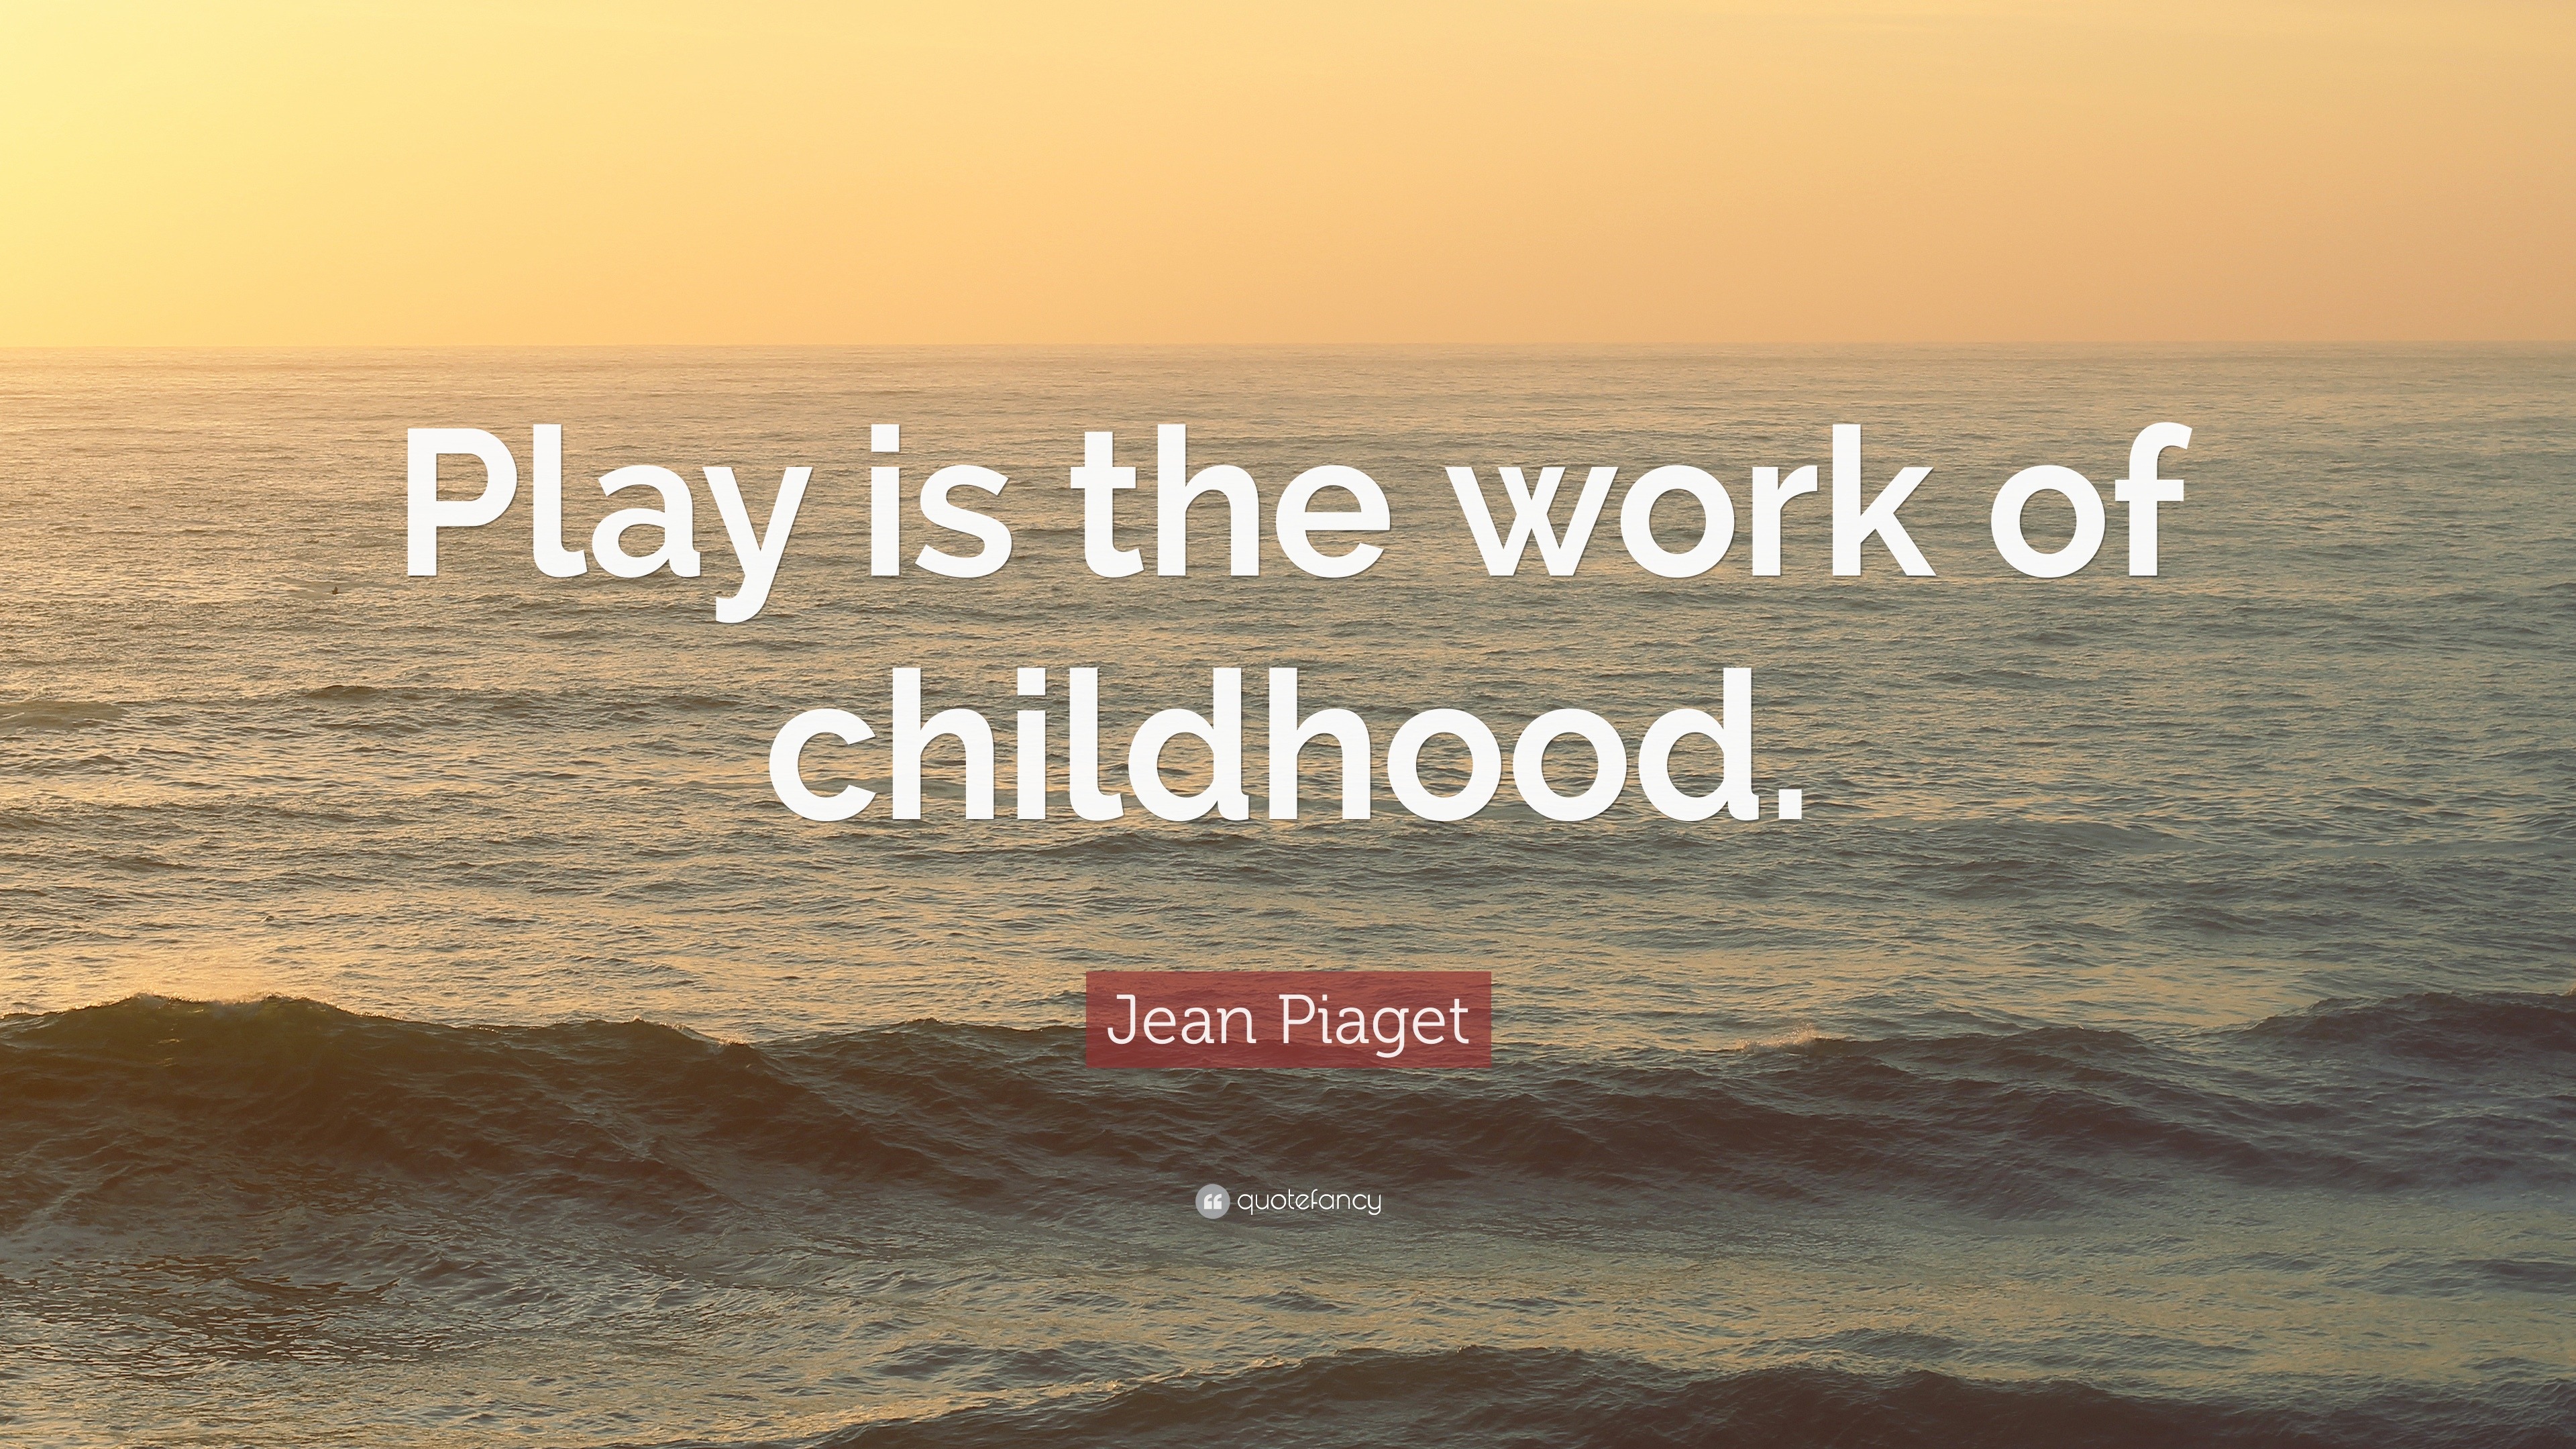 Jean Piaget Quotes On Play